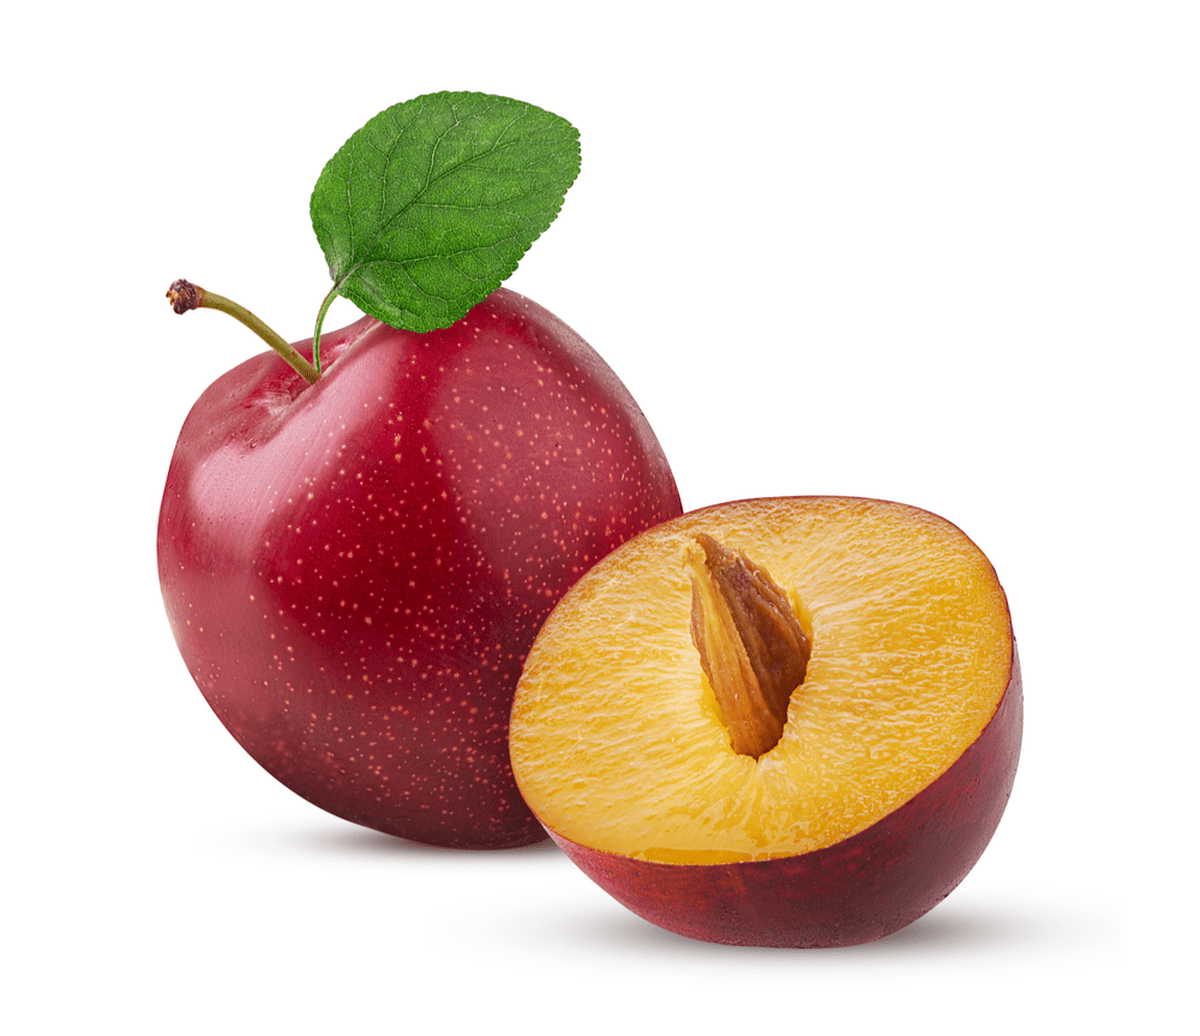 stock photo of a plum